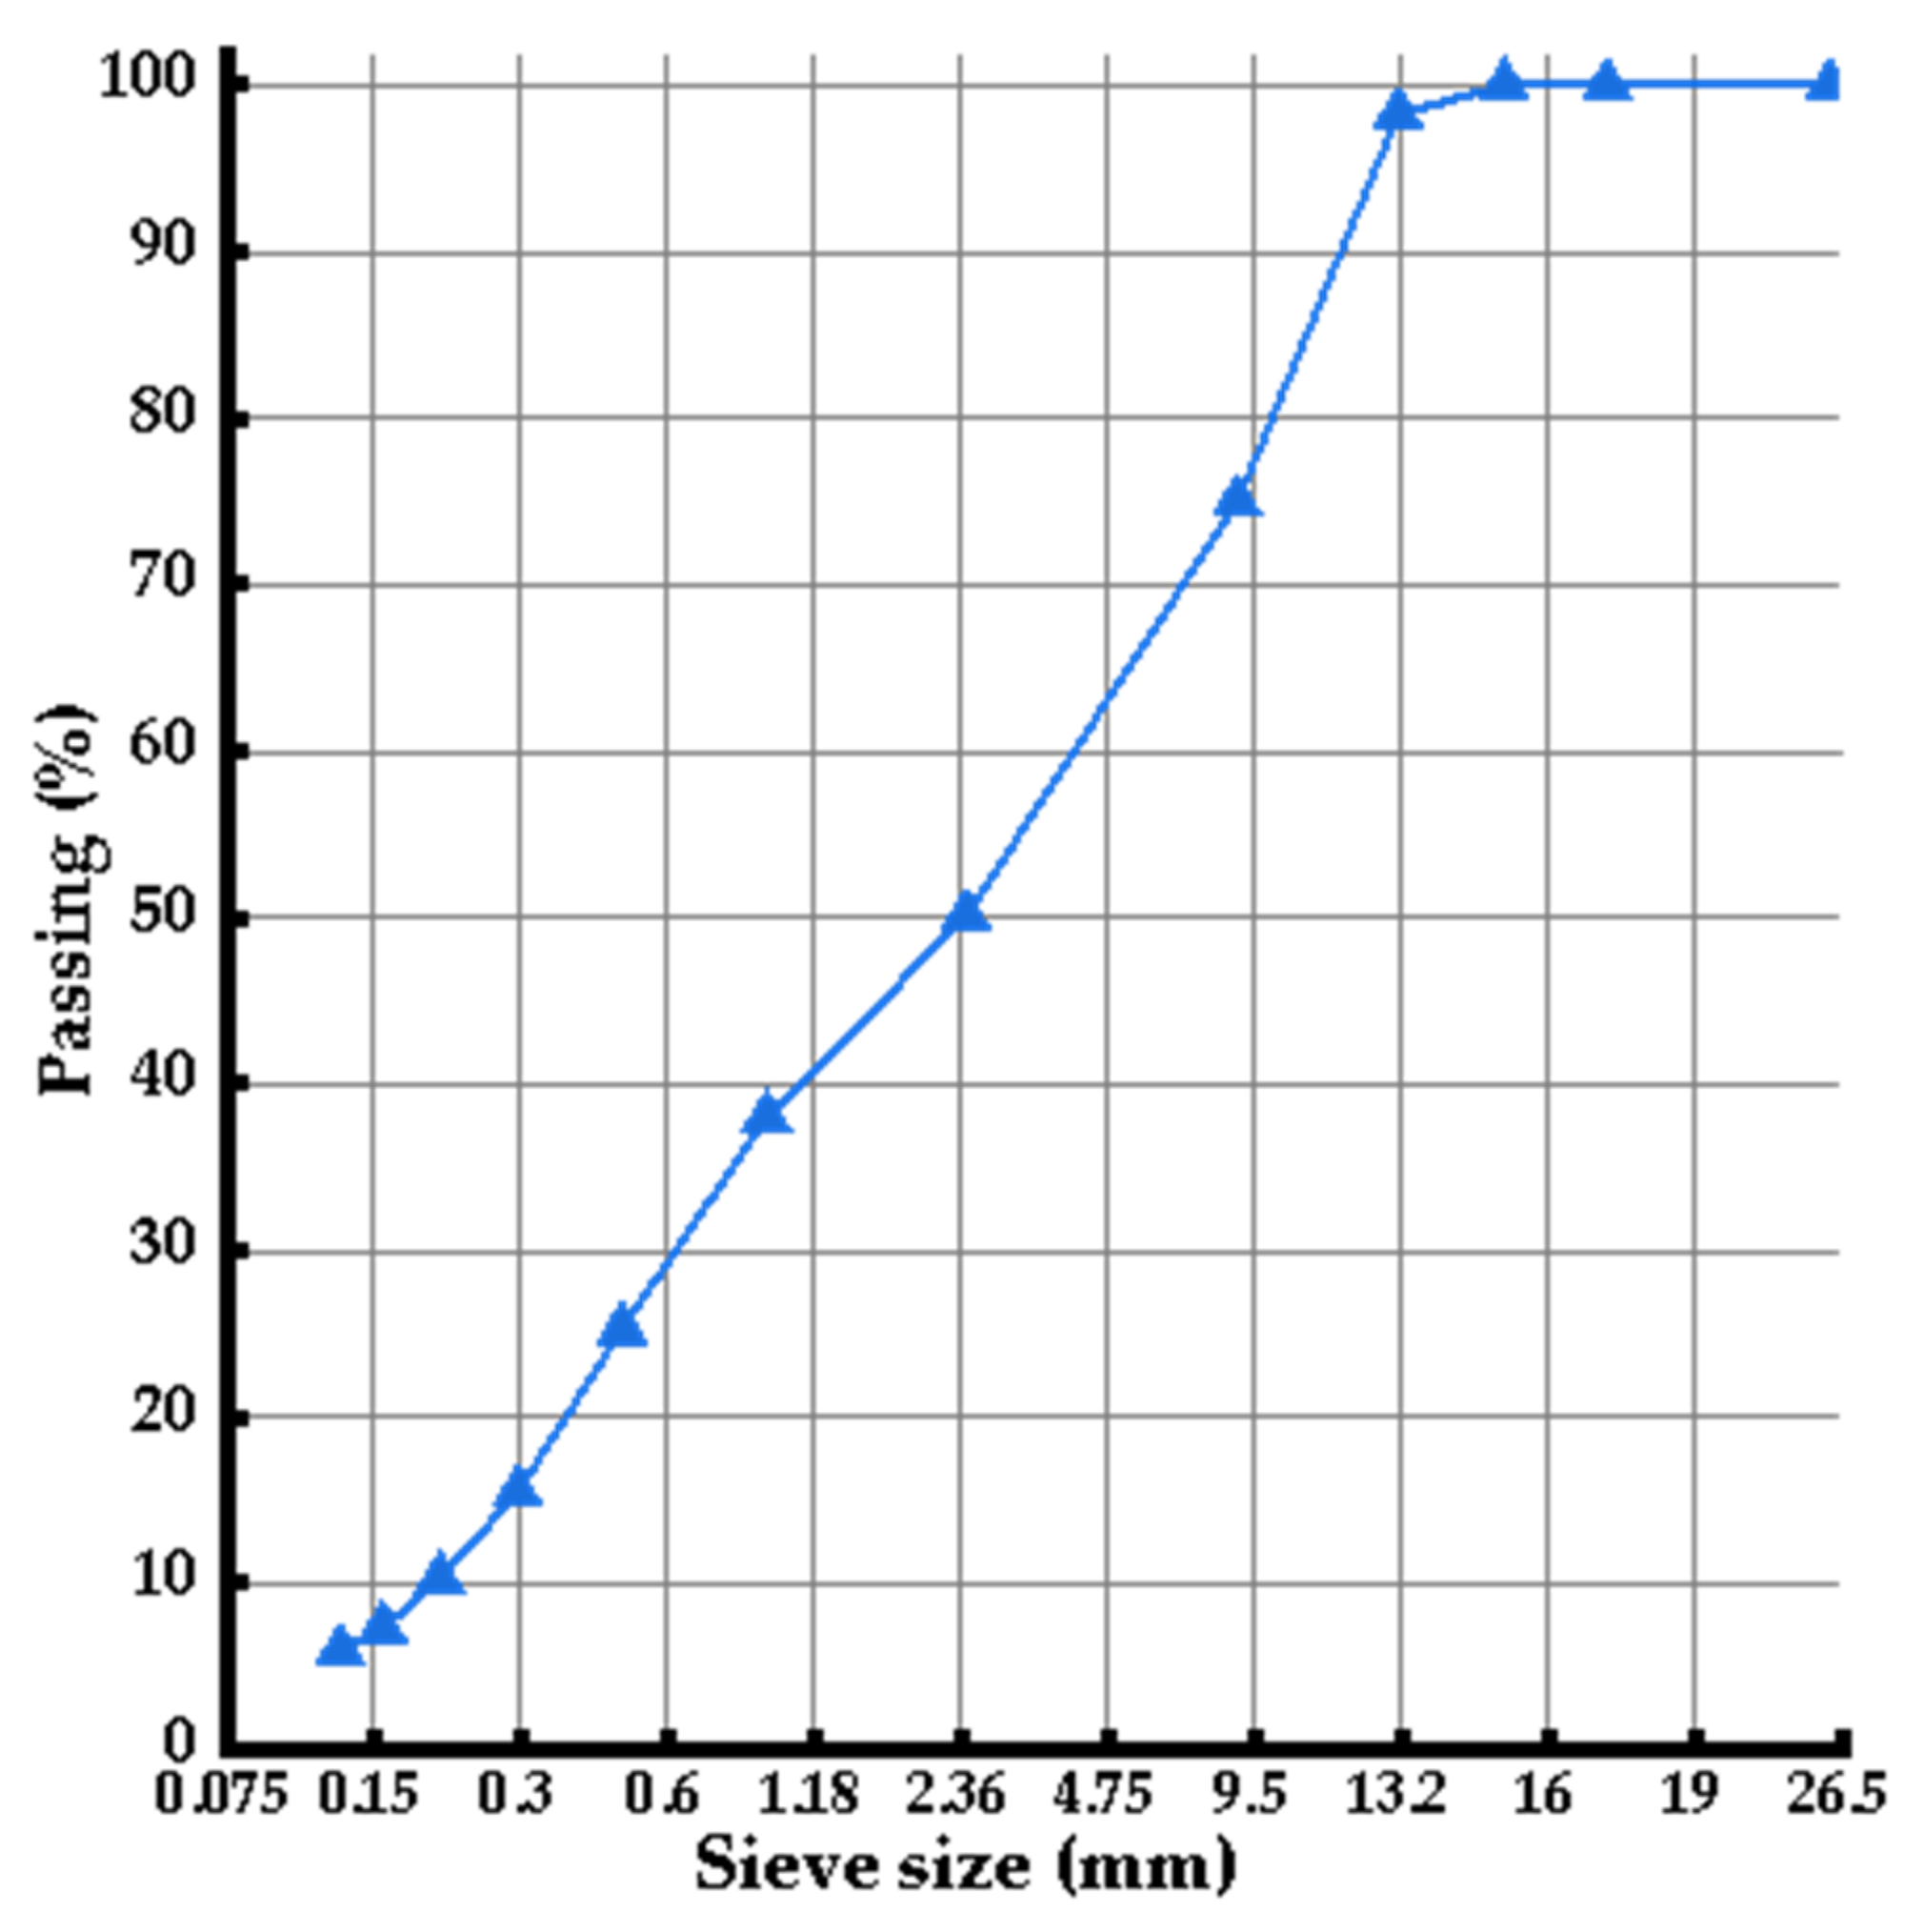 MTR curve showing the relation between binder ratio (ml/g) and the